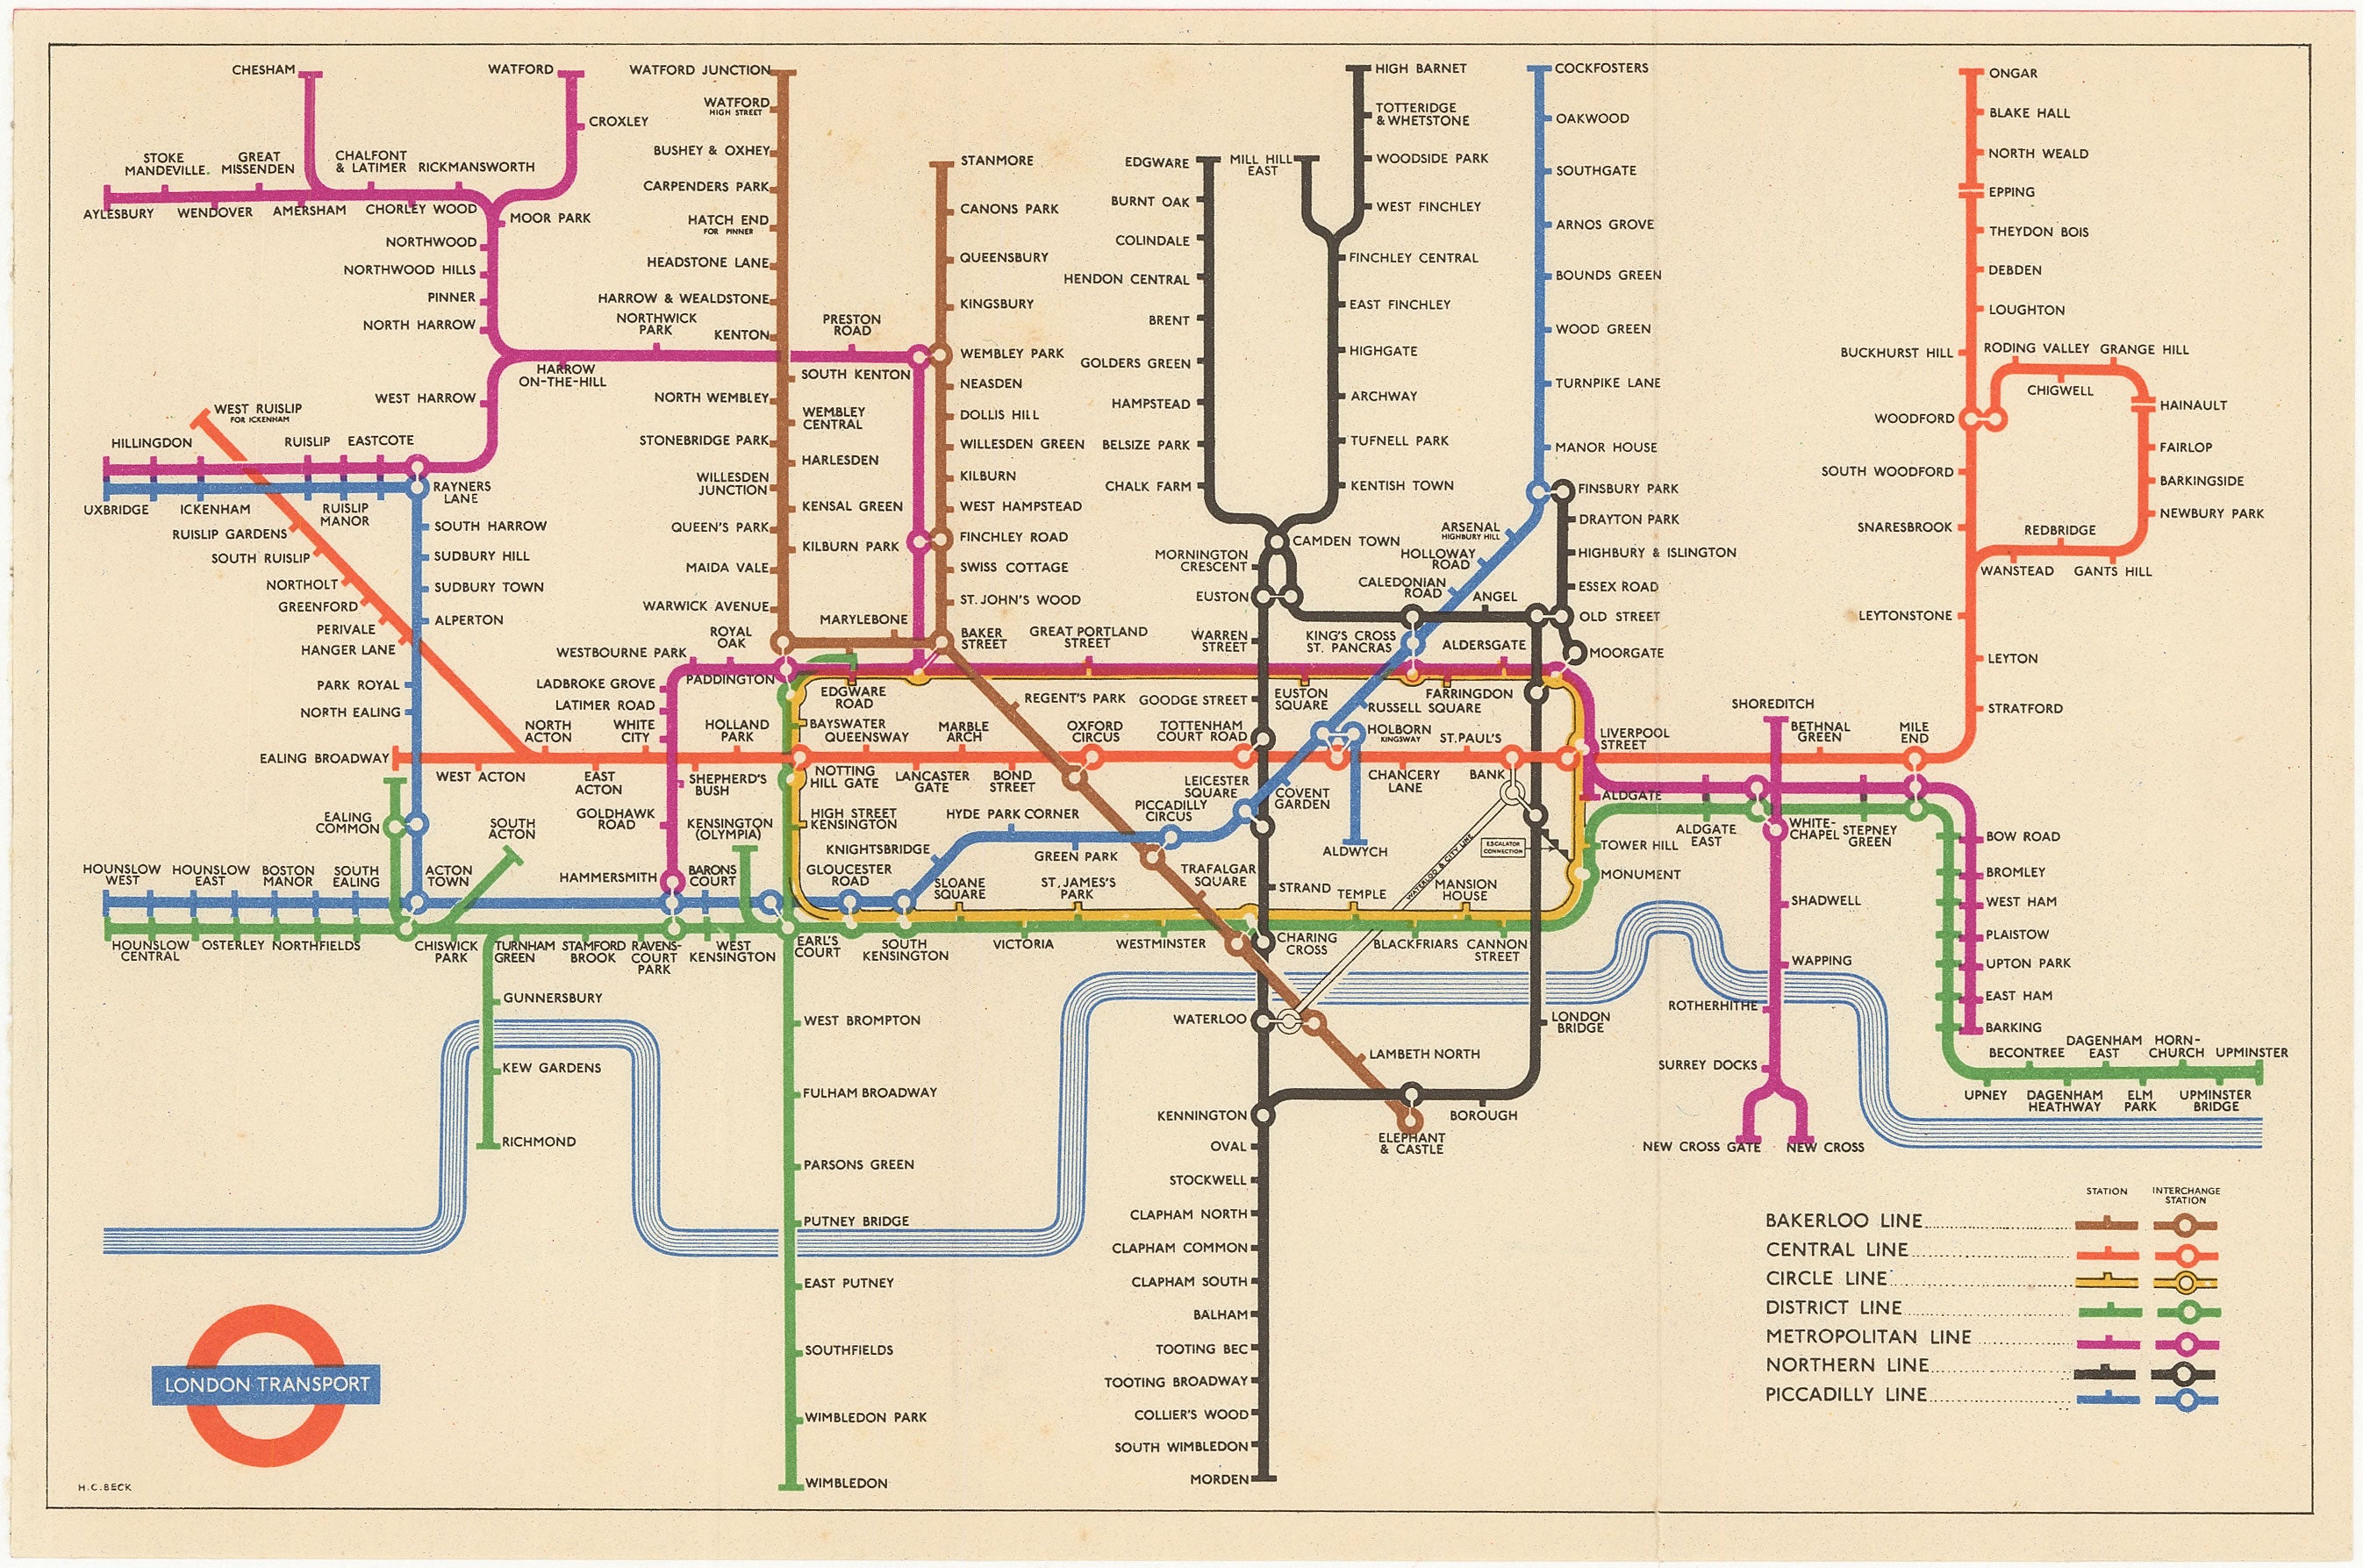 Featured: Transit and Railroad Maps